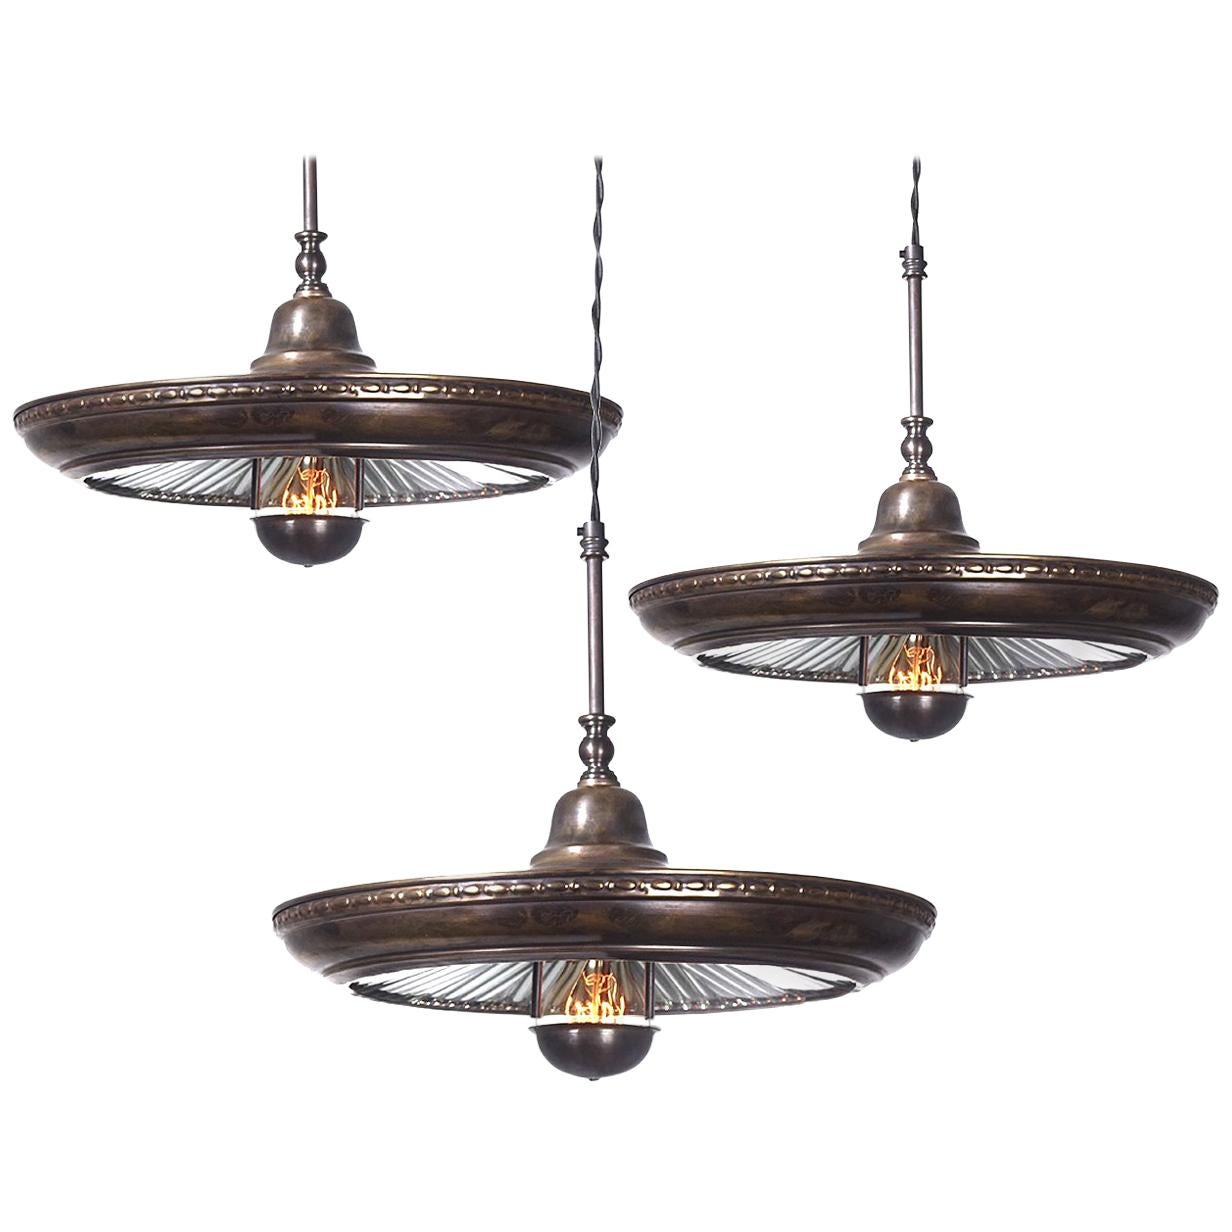 We have a nice collection of these Classic mirrored ring pendants. In addition to the fluted mirror there are some subtle decorative details that make this one stand out. The most interesting feature is the bulb cover with three springs and a hole